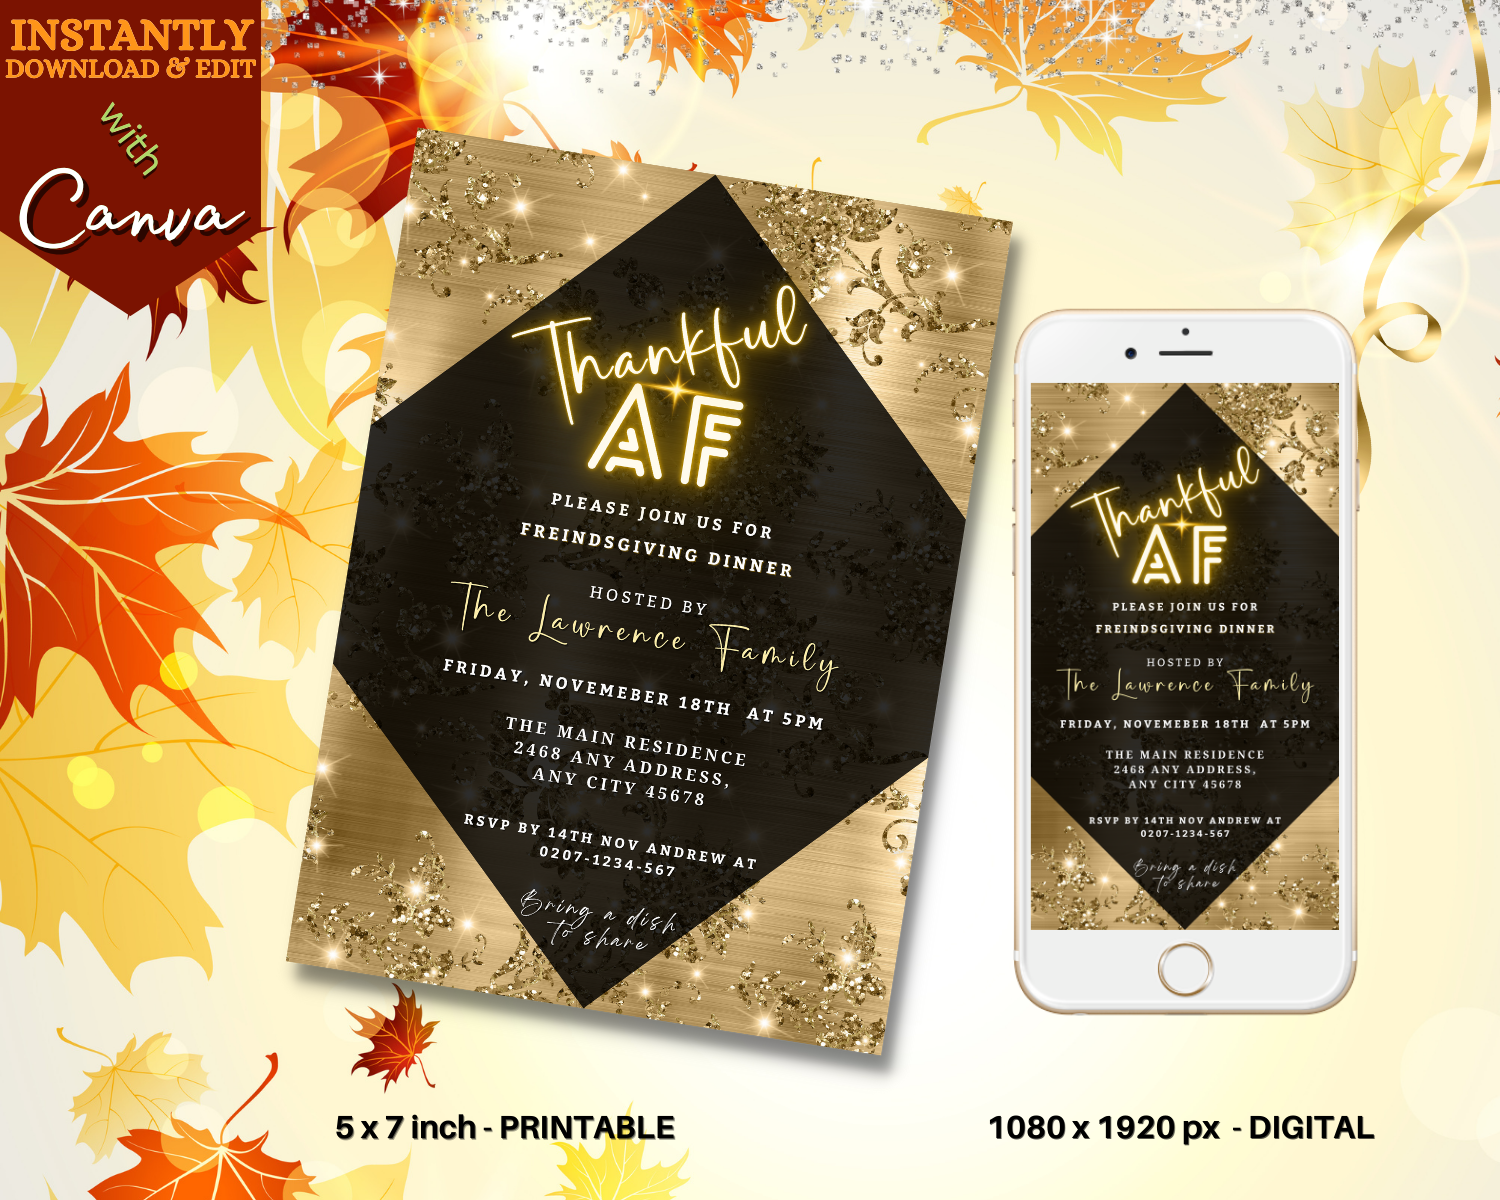 Thankful AF Golden Leaves Diamond Thanksgiving Dinner Evite displayed on a smartphone and a printed invitation.